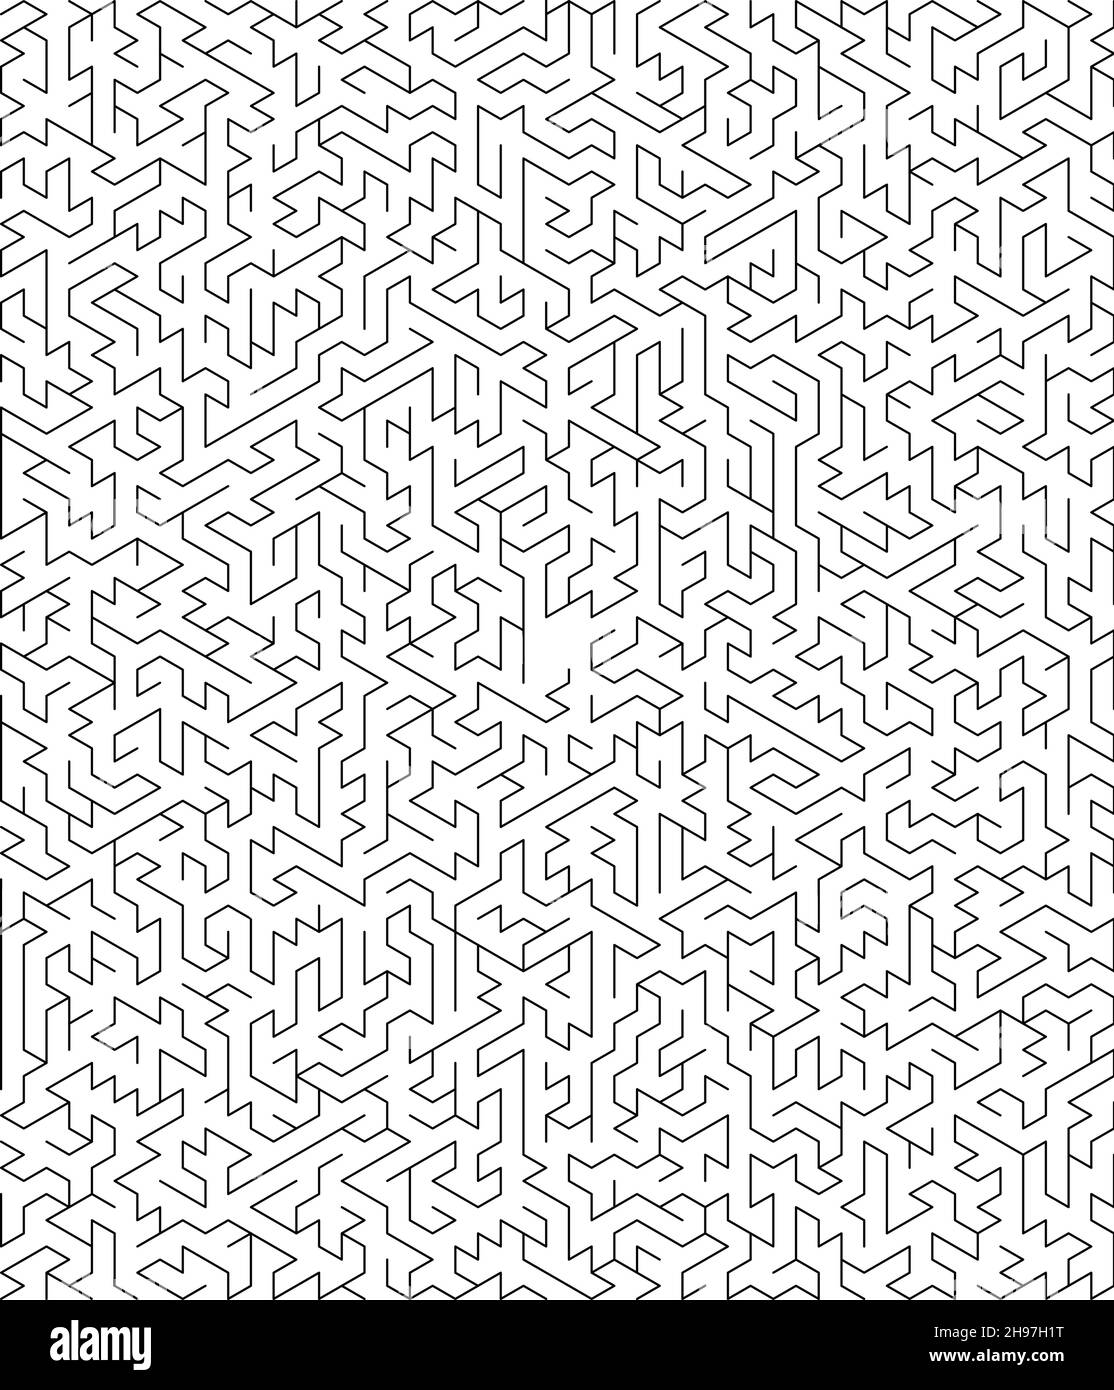 Vector labyrinth background, maze illustration isolated over white background Stock Vector